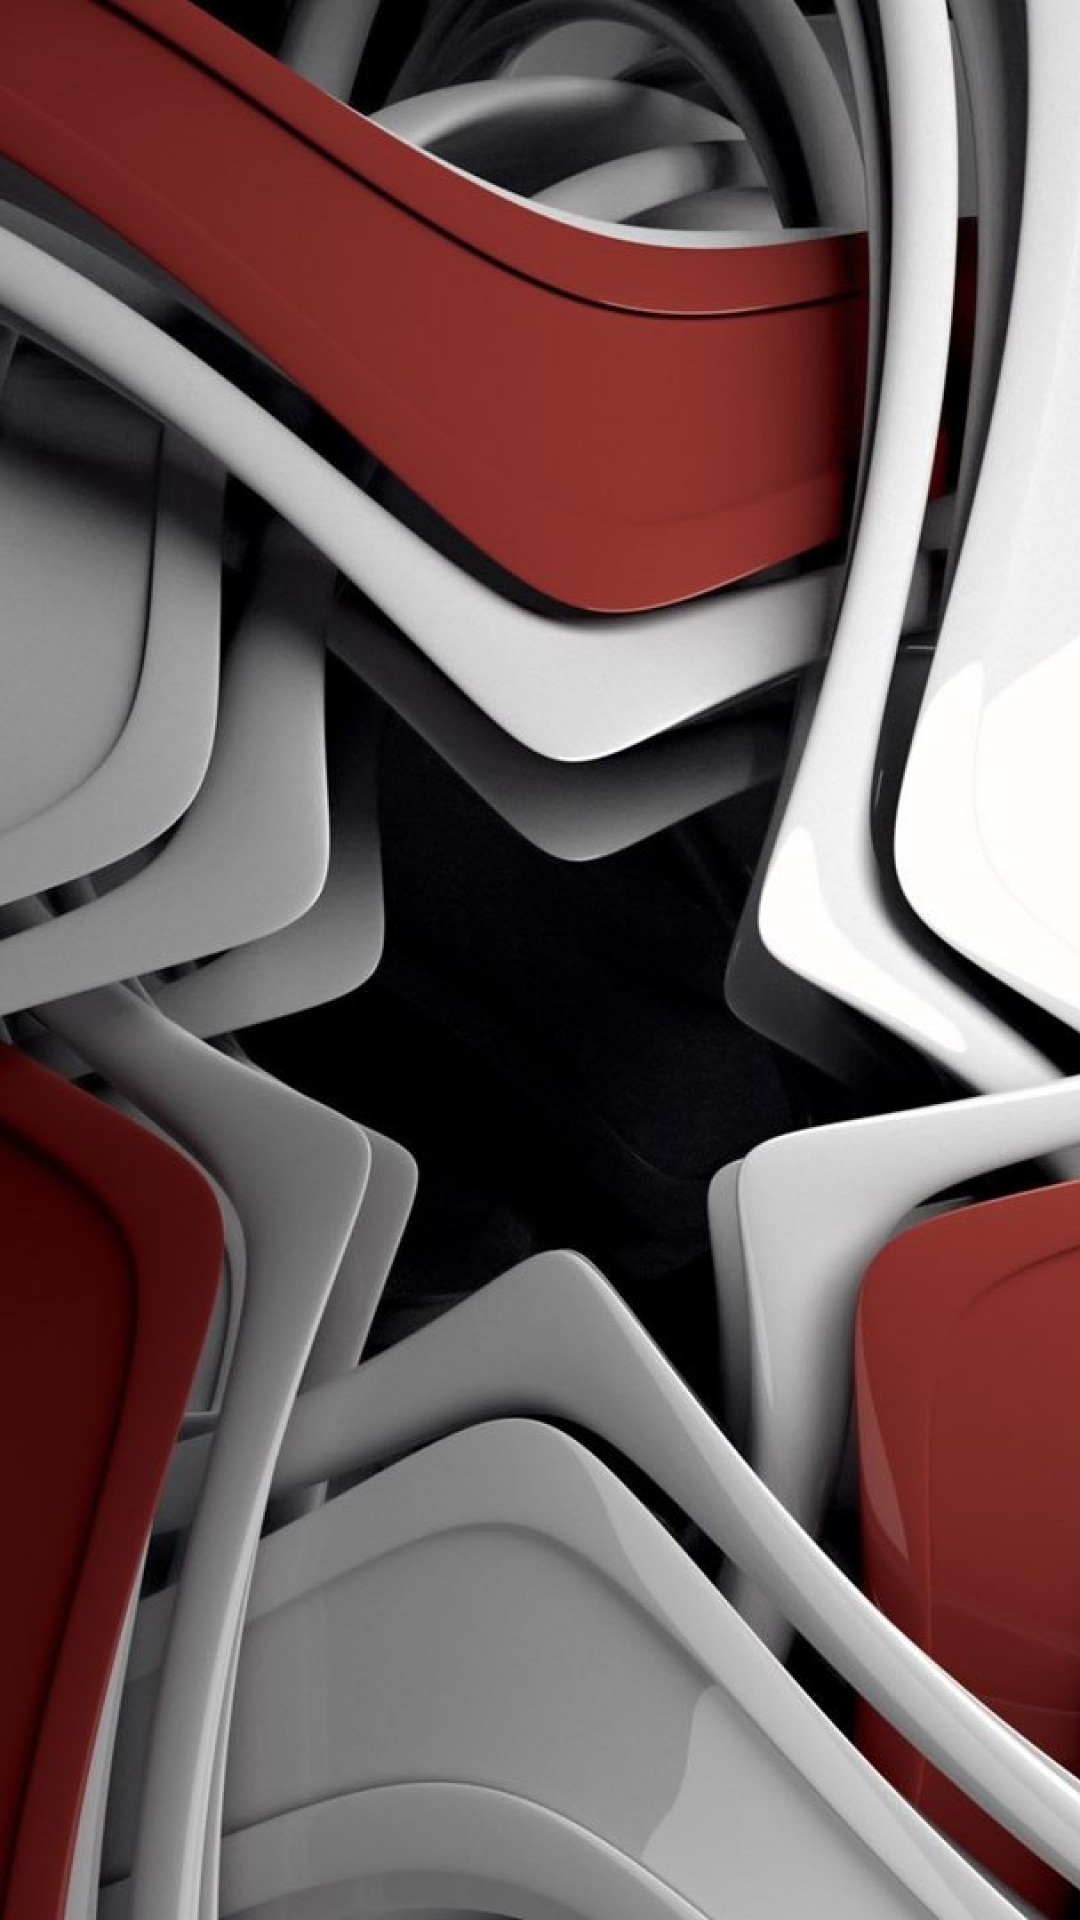 White and Red Plastic Chairs. Wallpaper in 1080x1920 Resolution